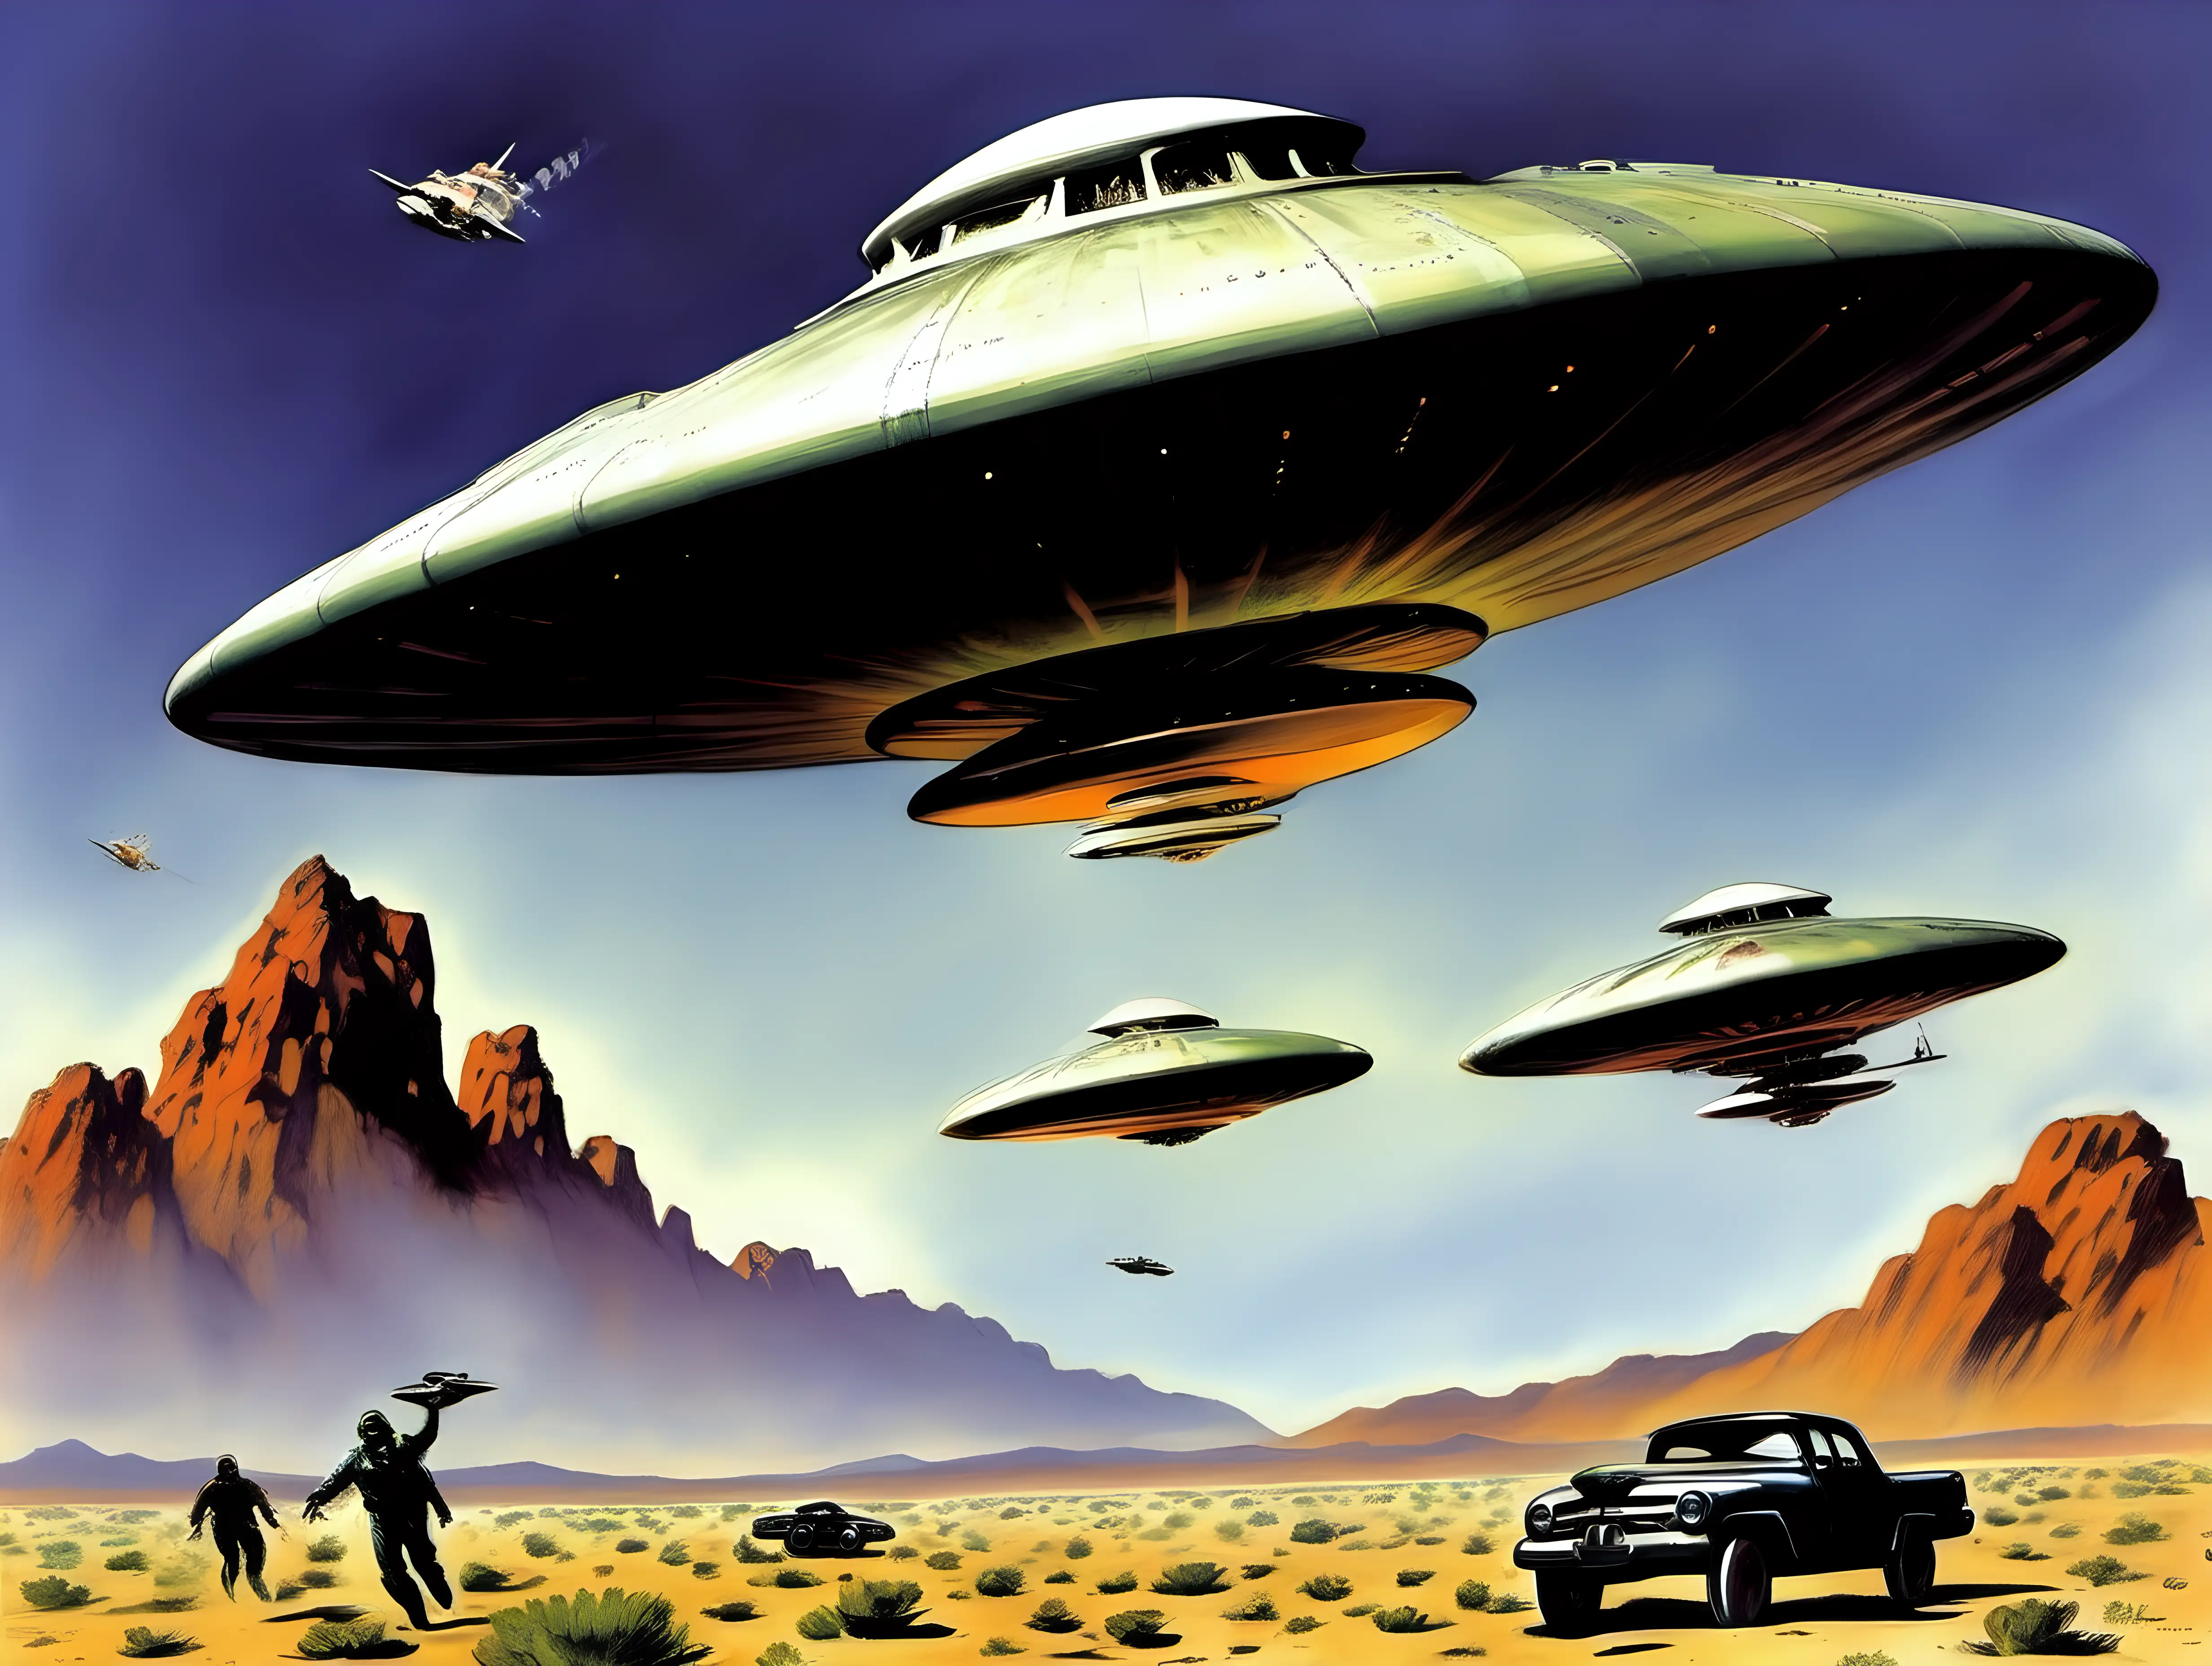 American Aircraft Pursuing UFOs in Frank Frazetta Style